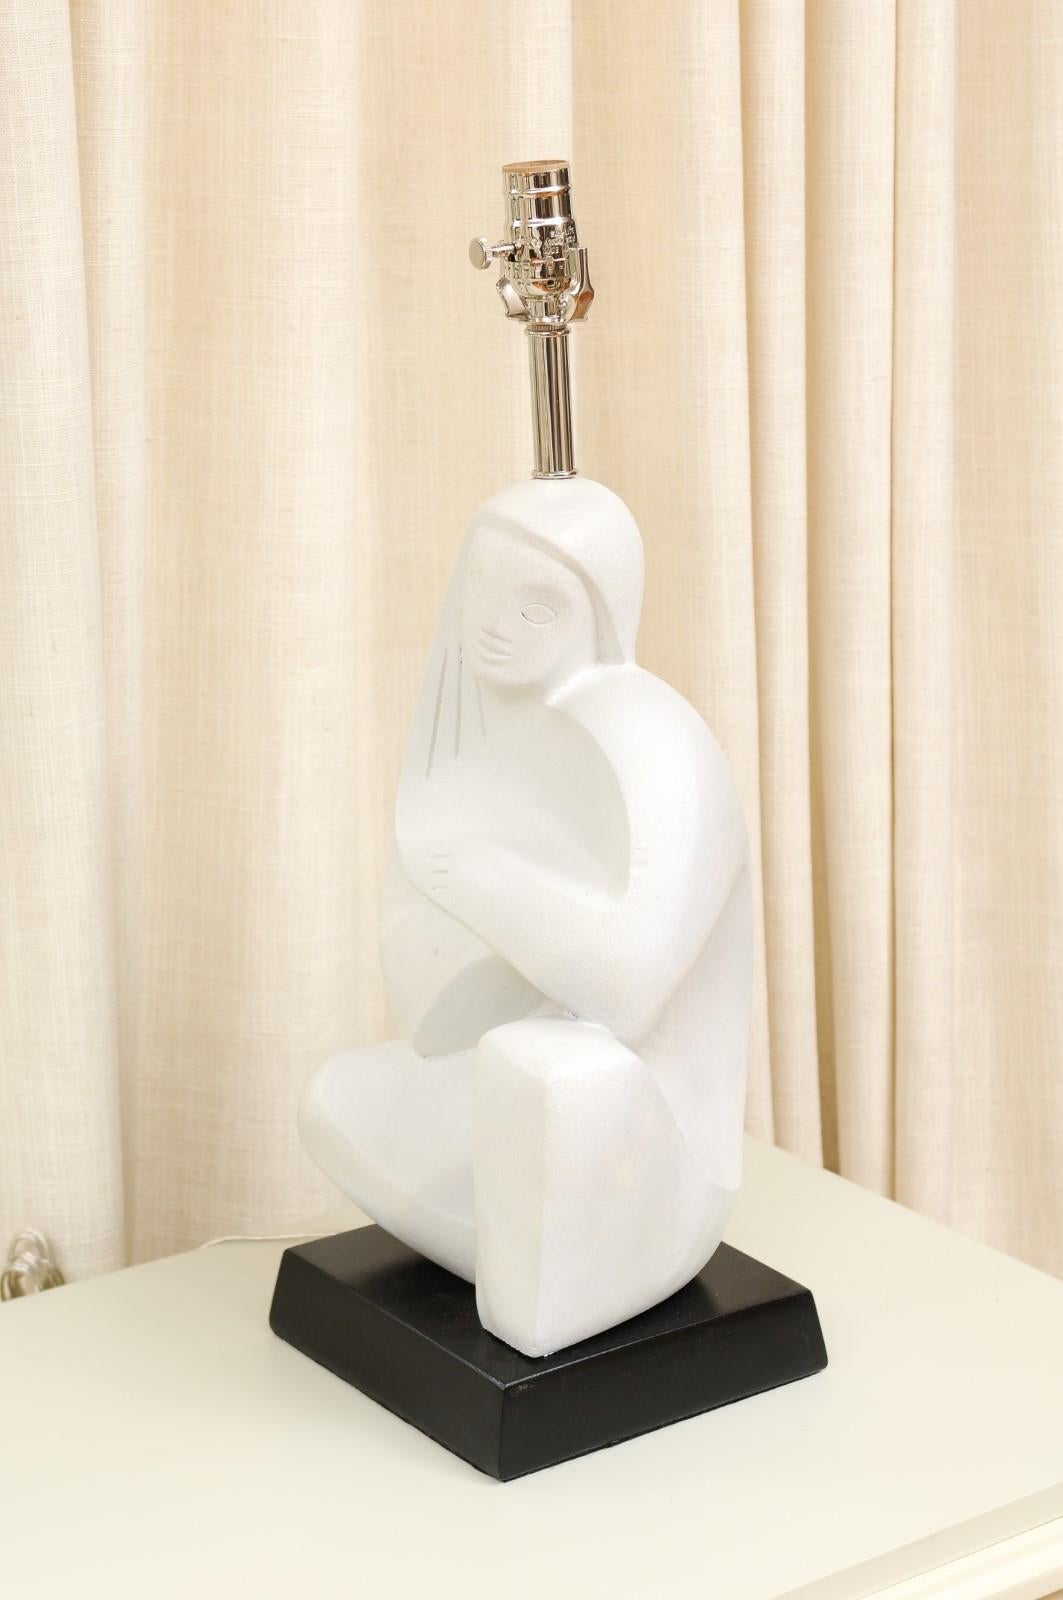 Remarkable Restored Pair of Plaster Cubist Figures by RIMA, New York, circa 1940 For Sale 4